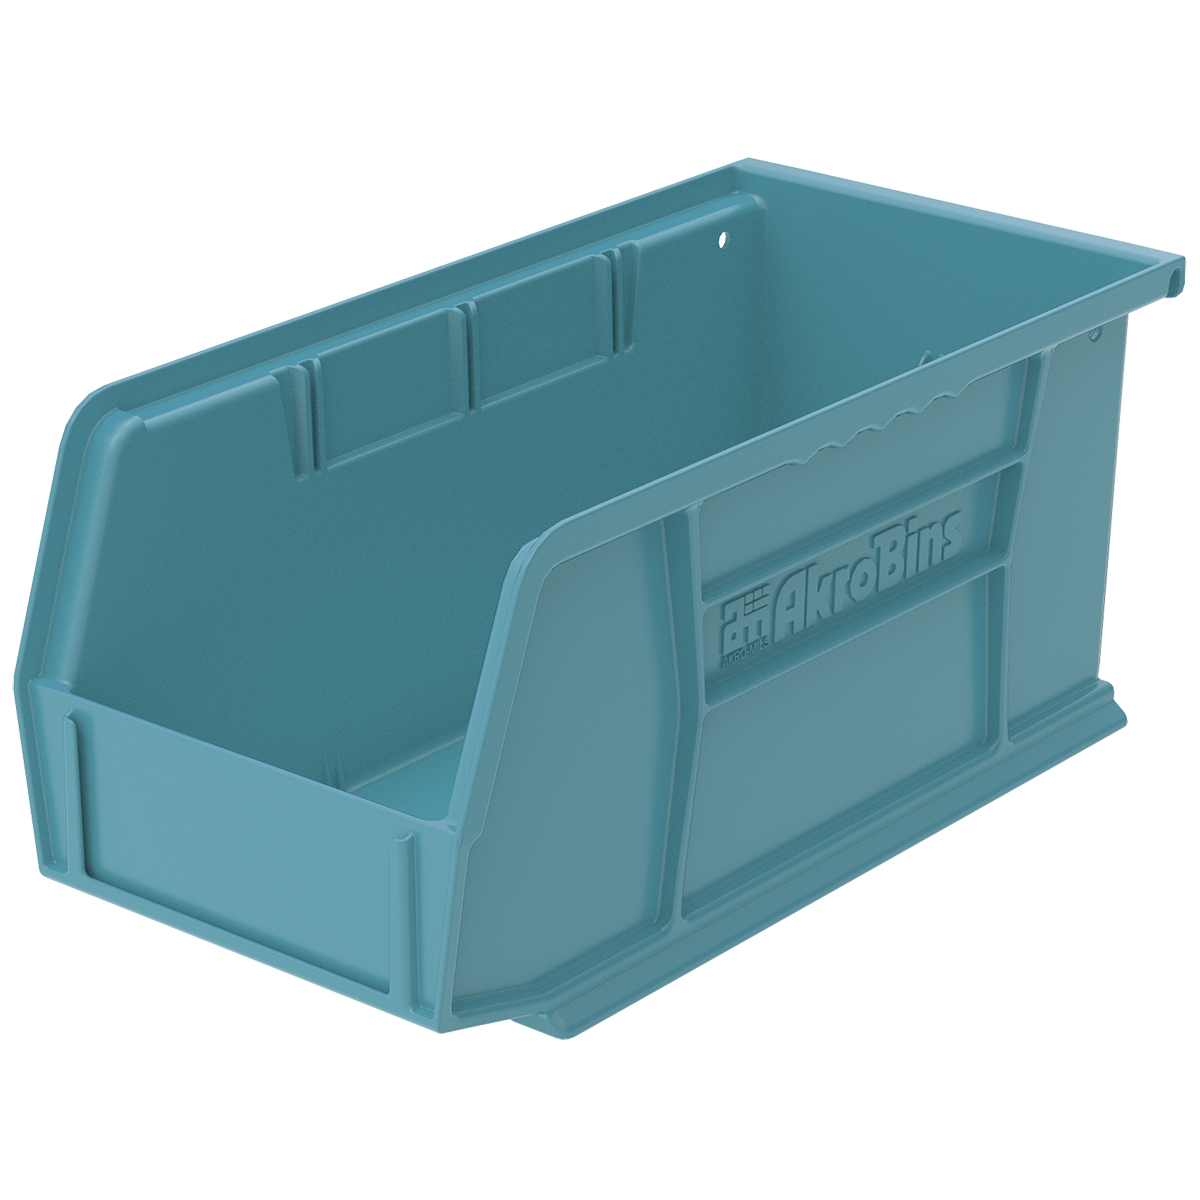 Details about   STORAGE BIN Plastic Hanging Stacking Blue qty 24 AKRO-MILS #30220 